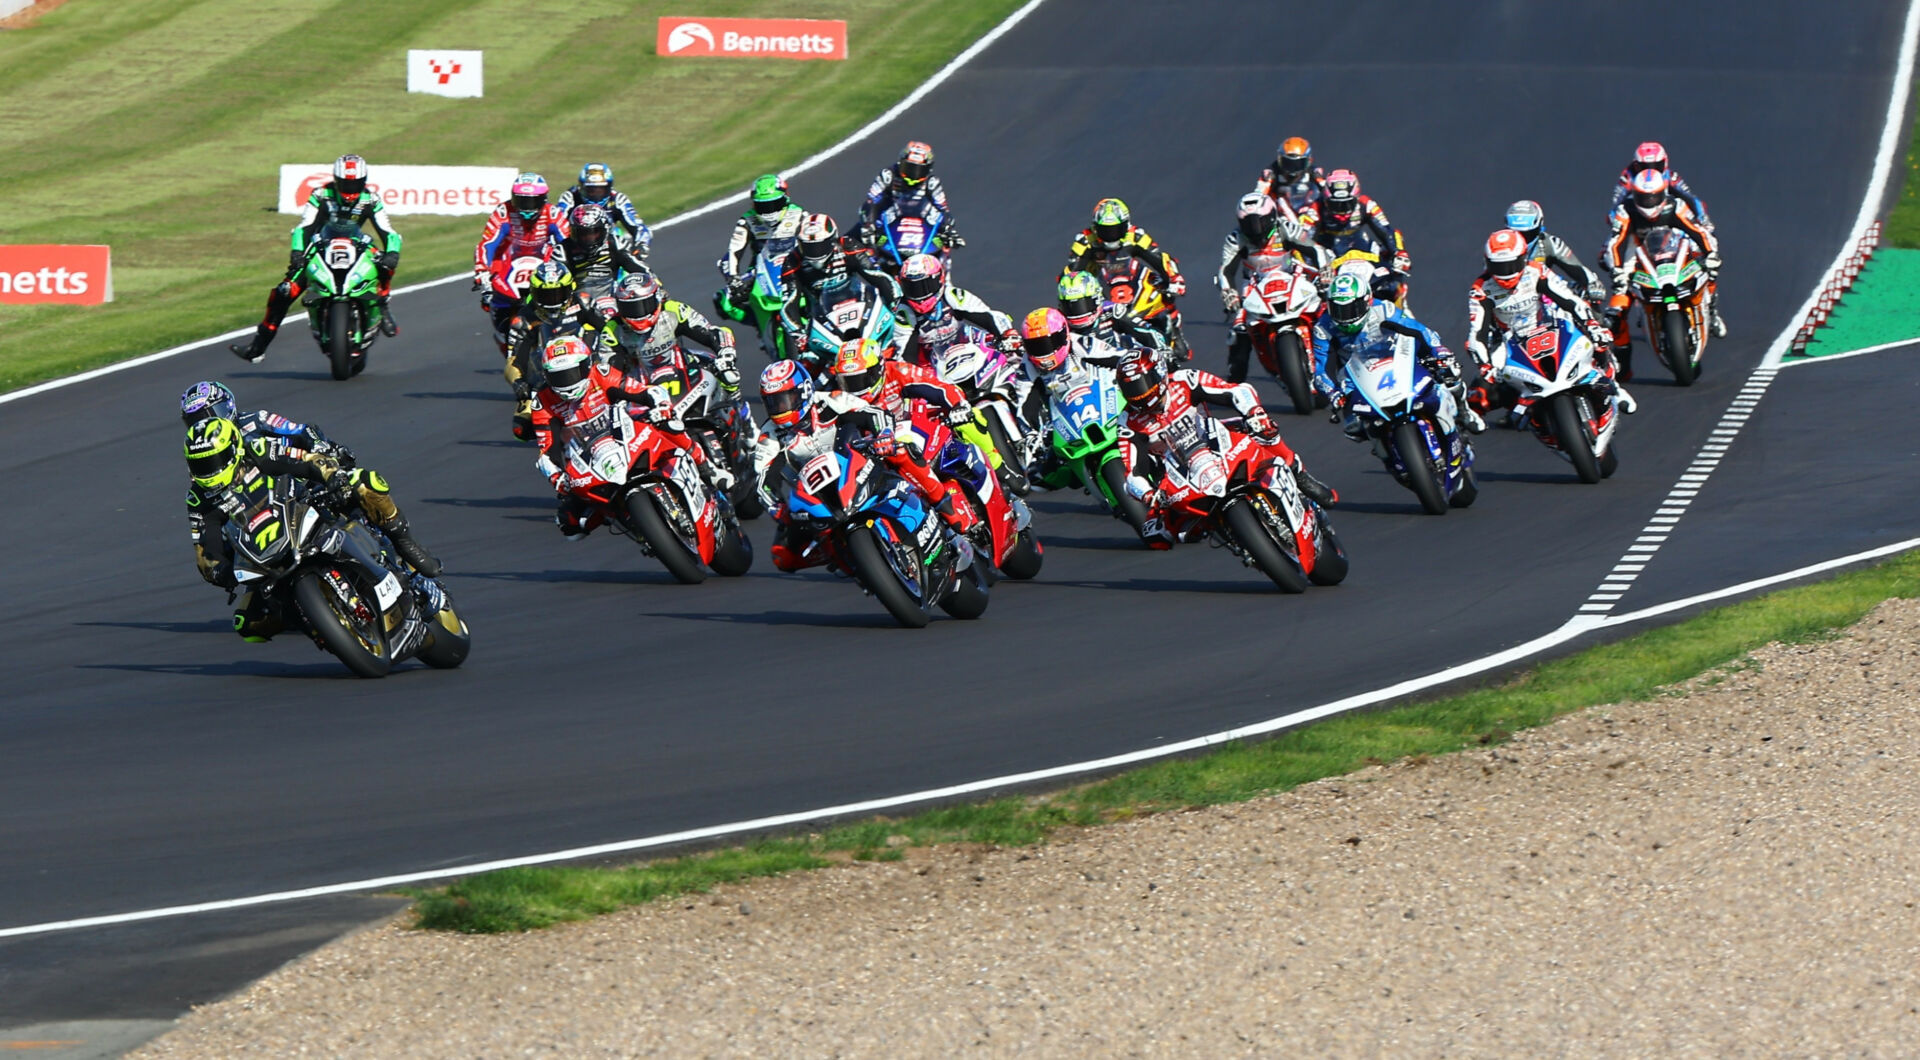 Kyle Ryde (77) leads the British Superbike field into Turn One at Donington Park. Photo courtesy MSVR.